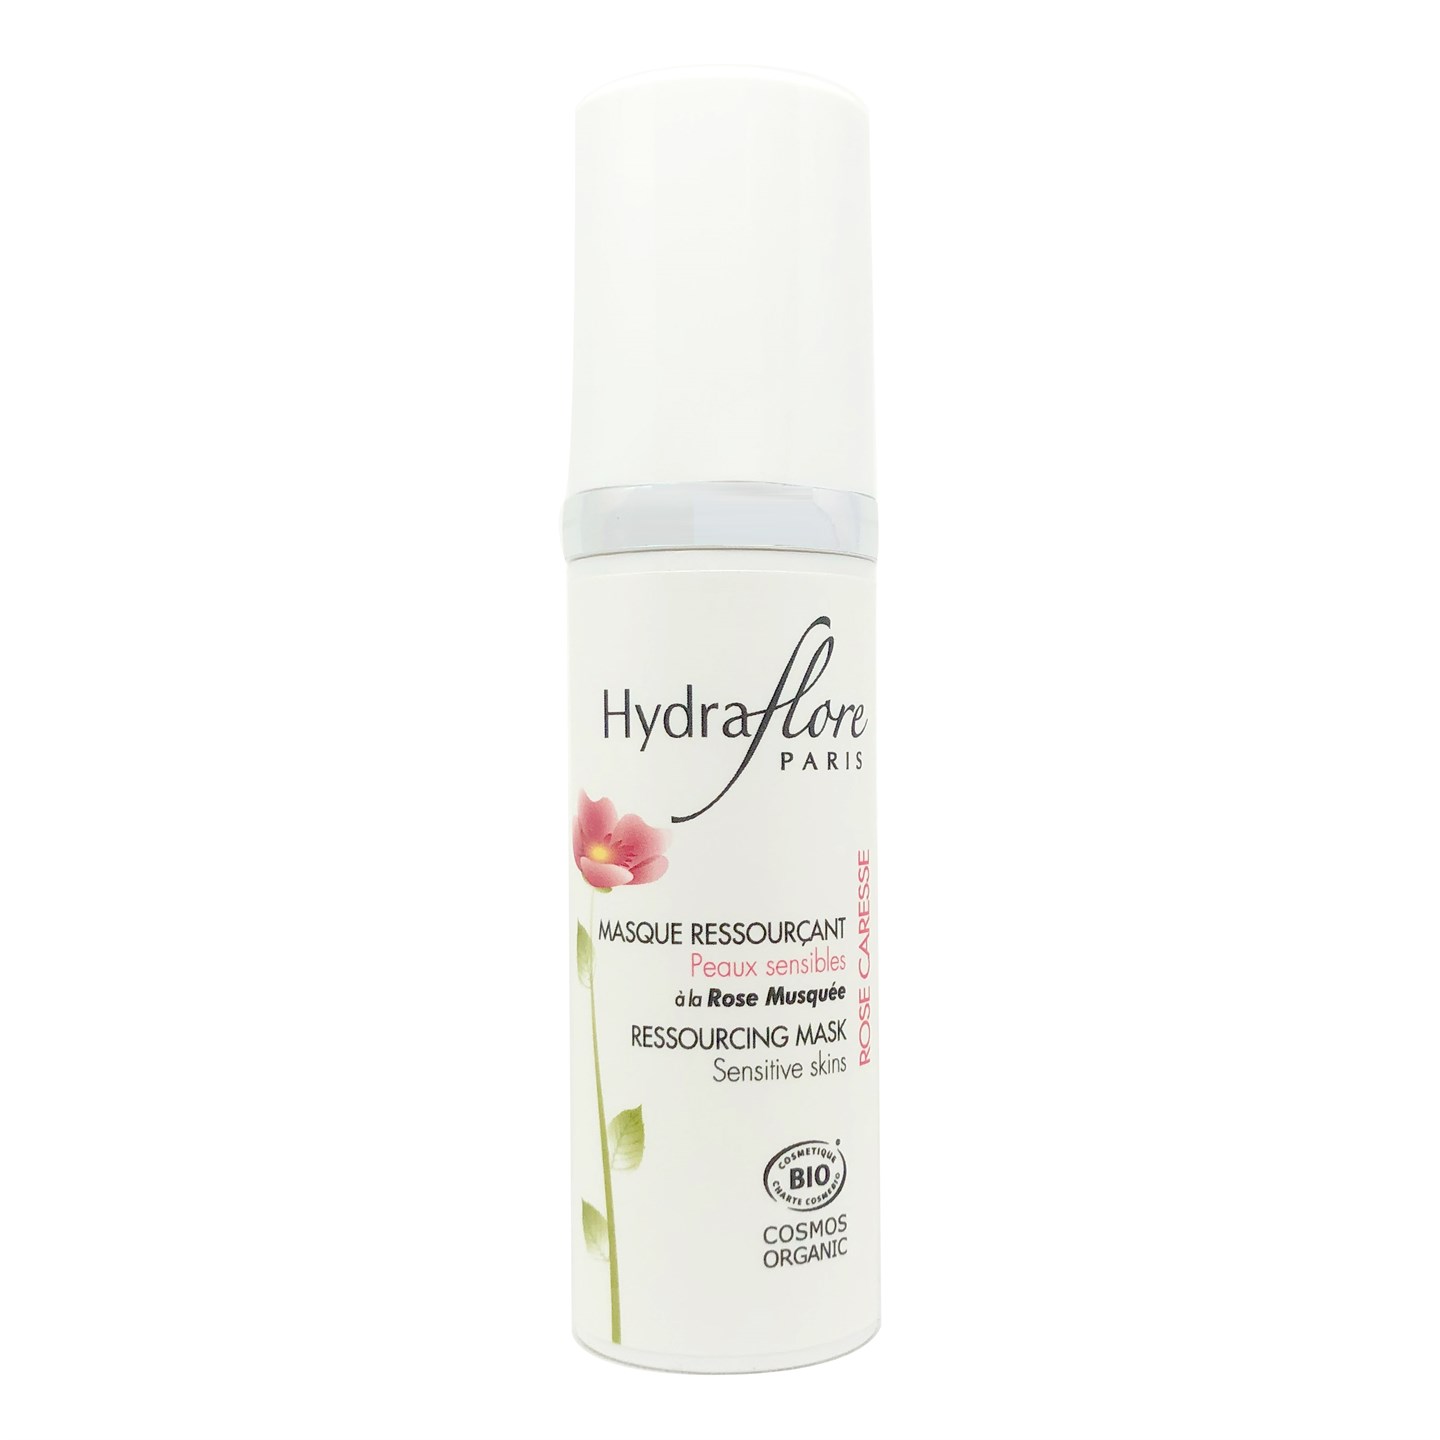 Hydraflore Moisturising Ressourcing Mask (formerly Soothing Mask) 40ml